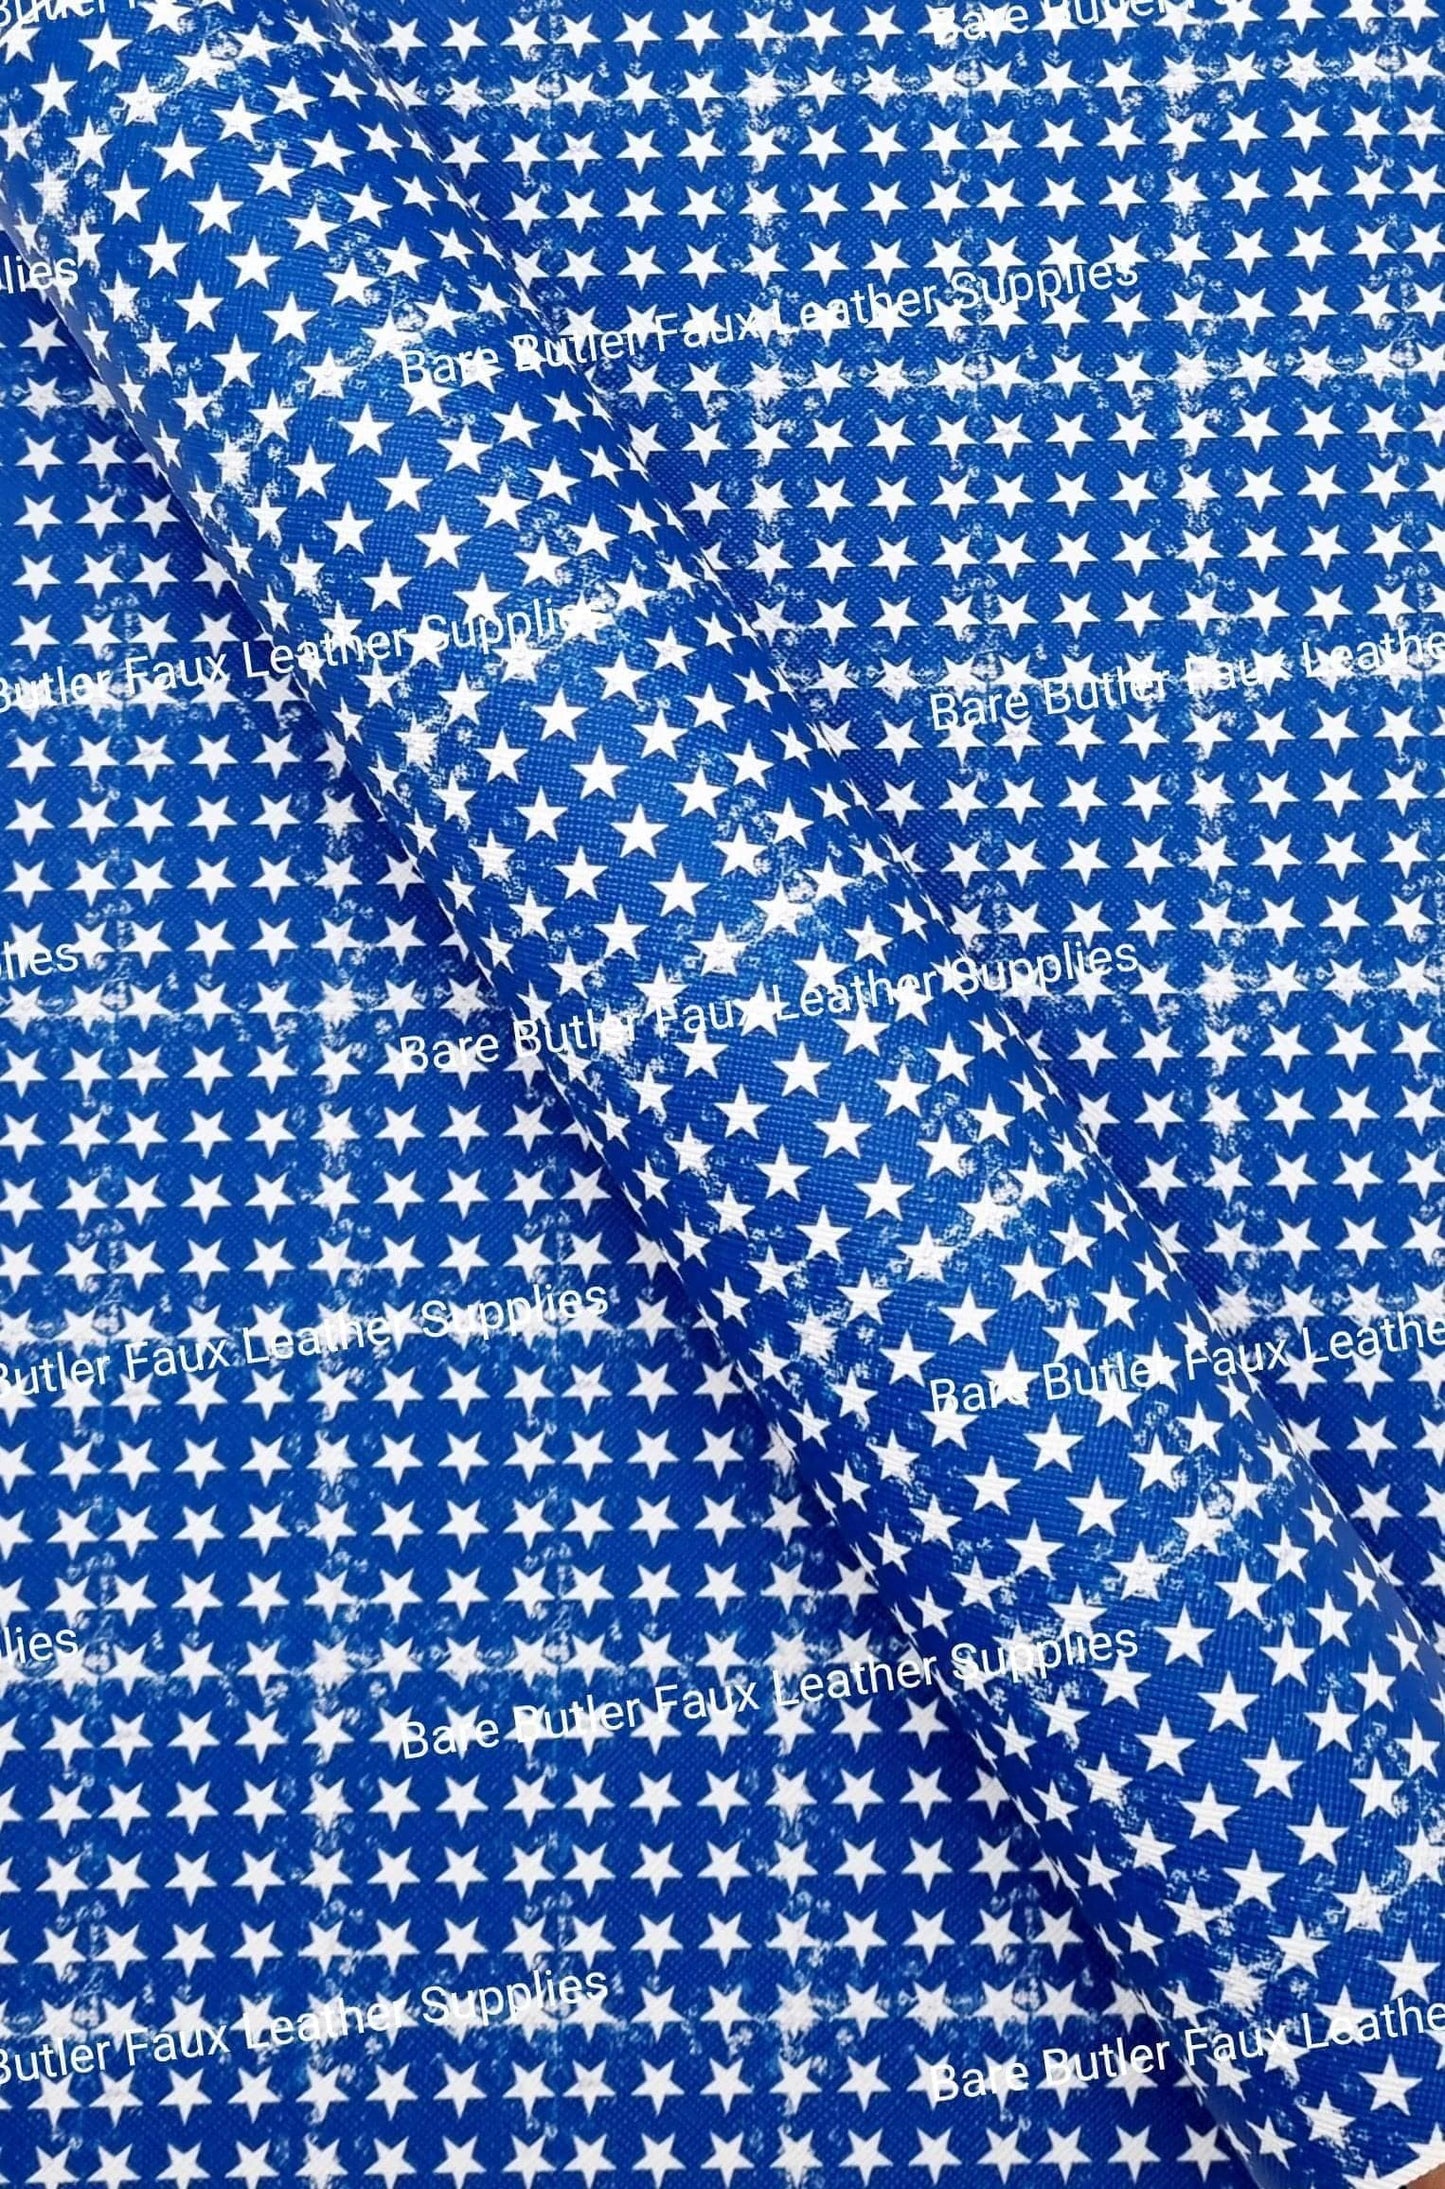 Distressed Blue & White Stars Faux Leather - Fabric, Faux, Faux Leather, Leather, leatherette, Litchi - Bare Butler Faux Leather Supplies 